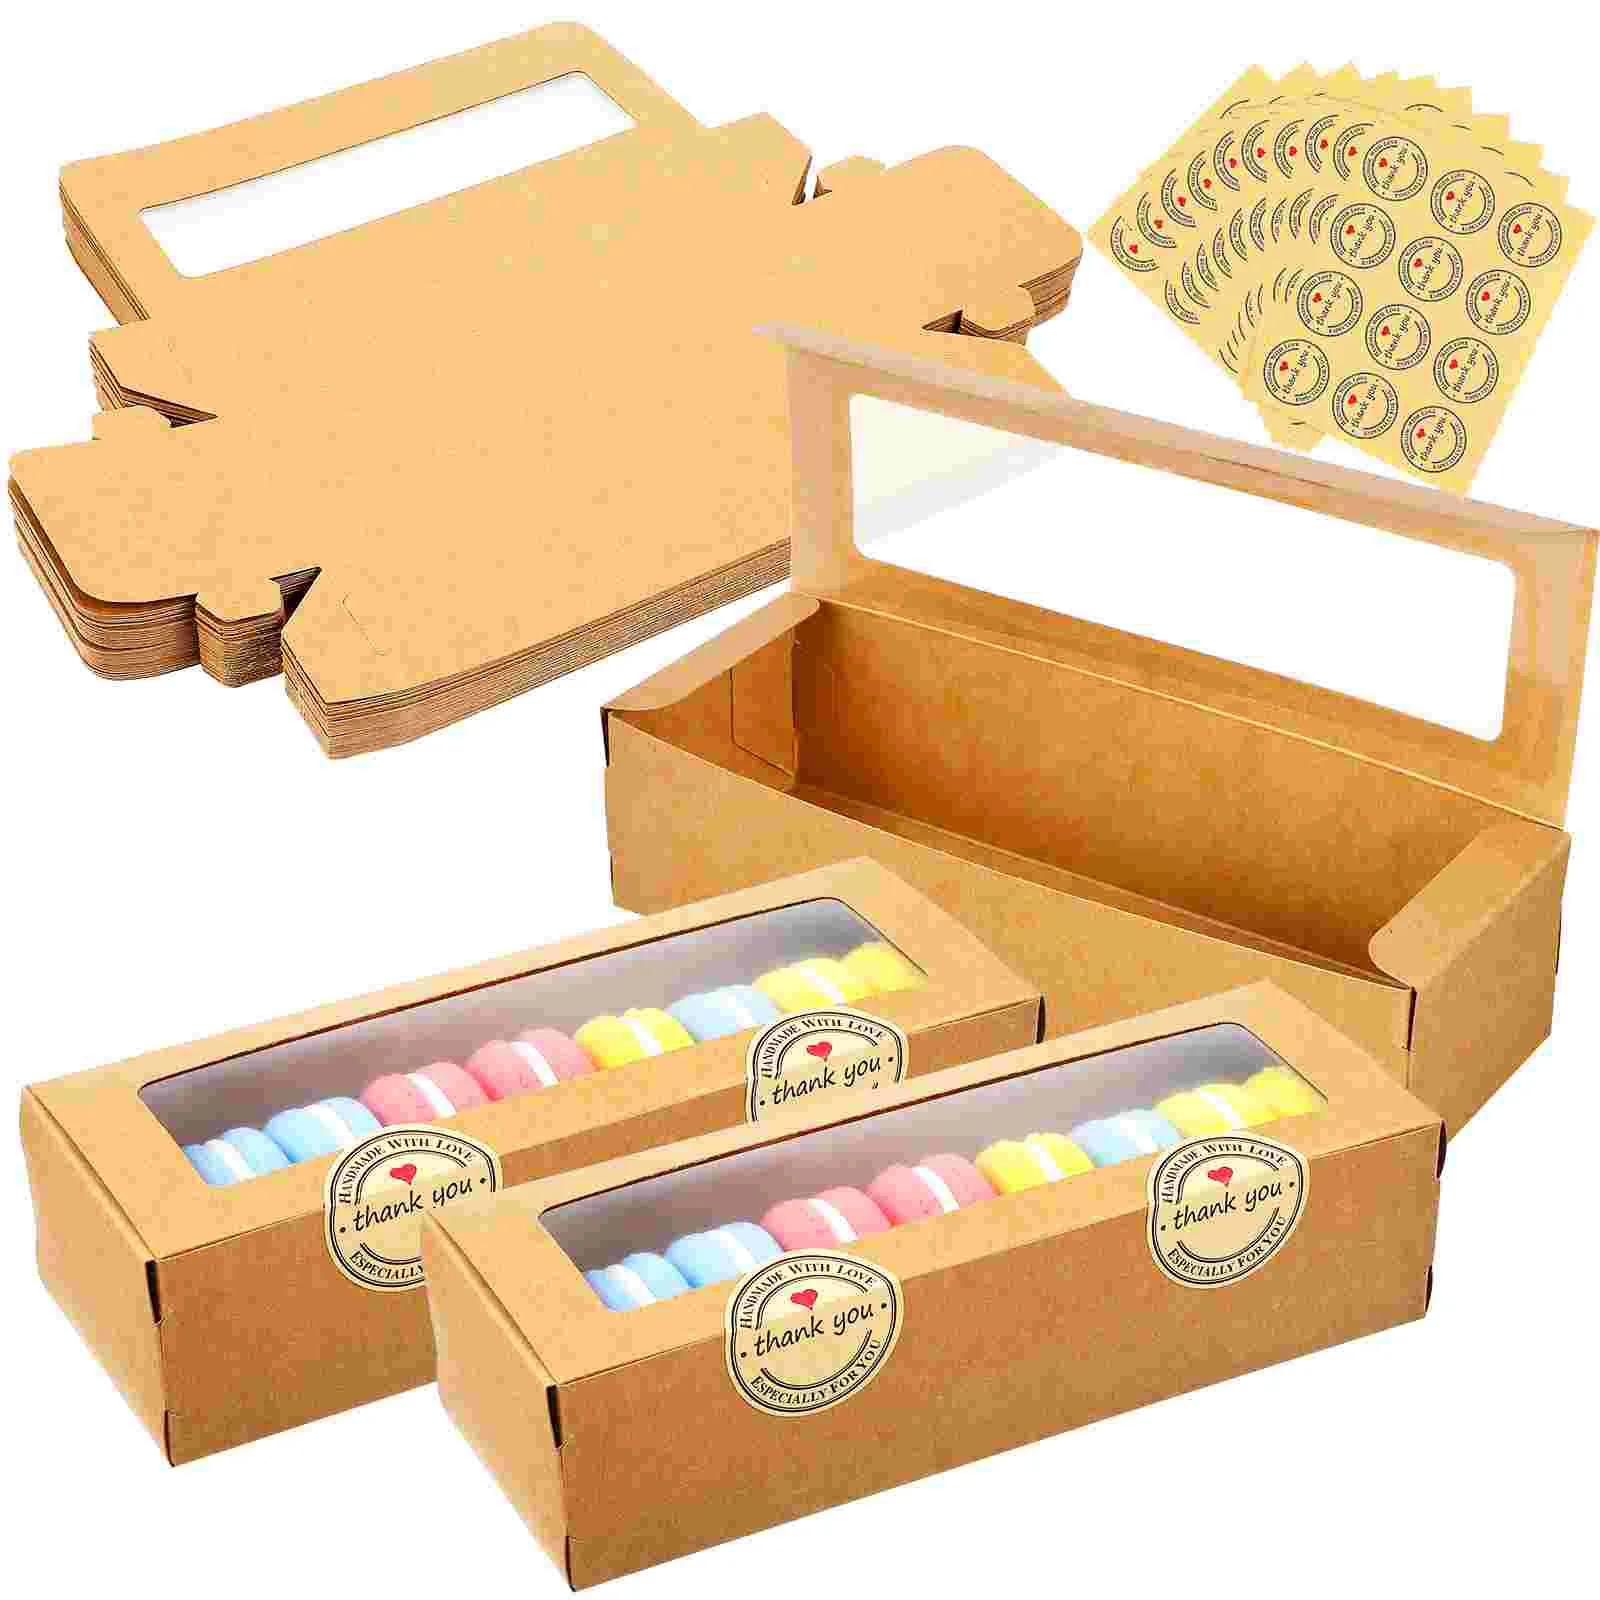 

Macaron Boxes Box Baking Suppliesmacaroon Pastrysticker Kraft Containers Large Macarons Packaging Packing Gift Truffle Container